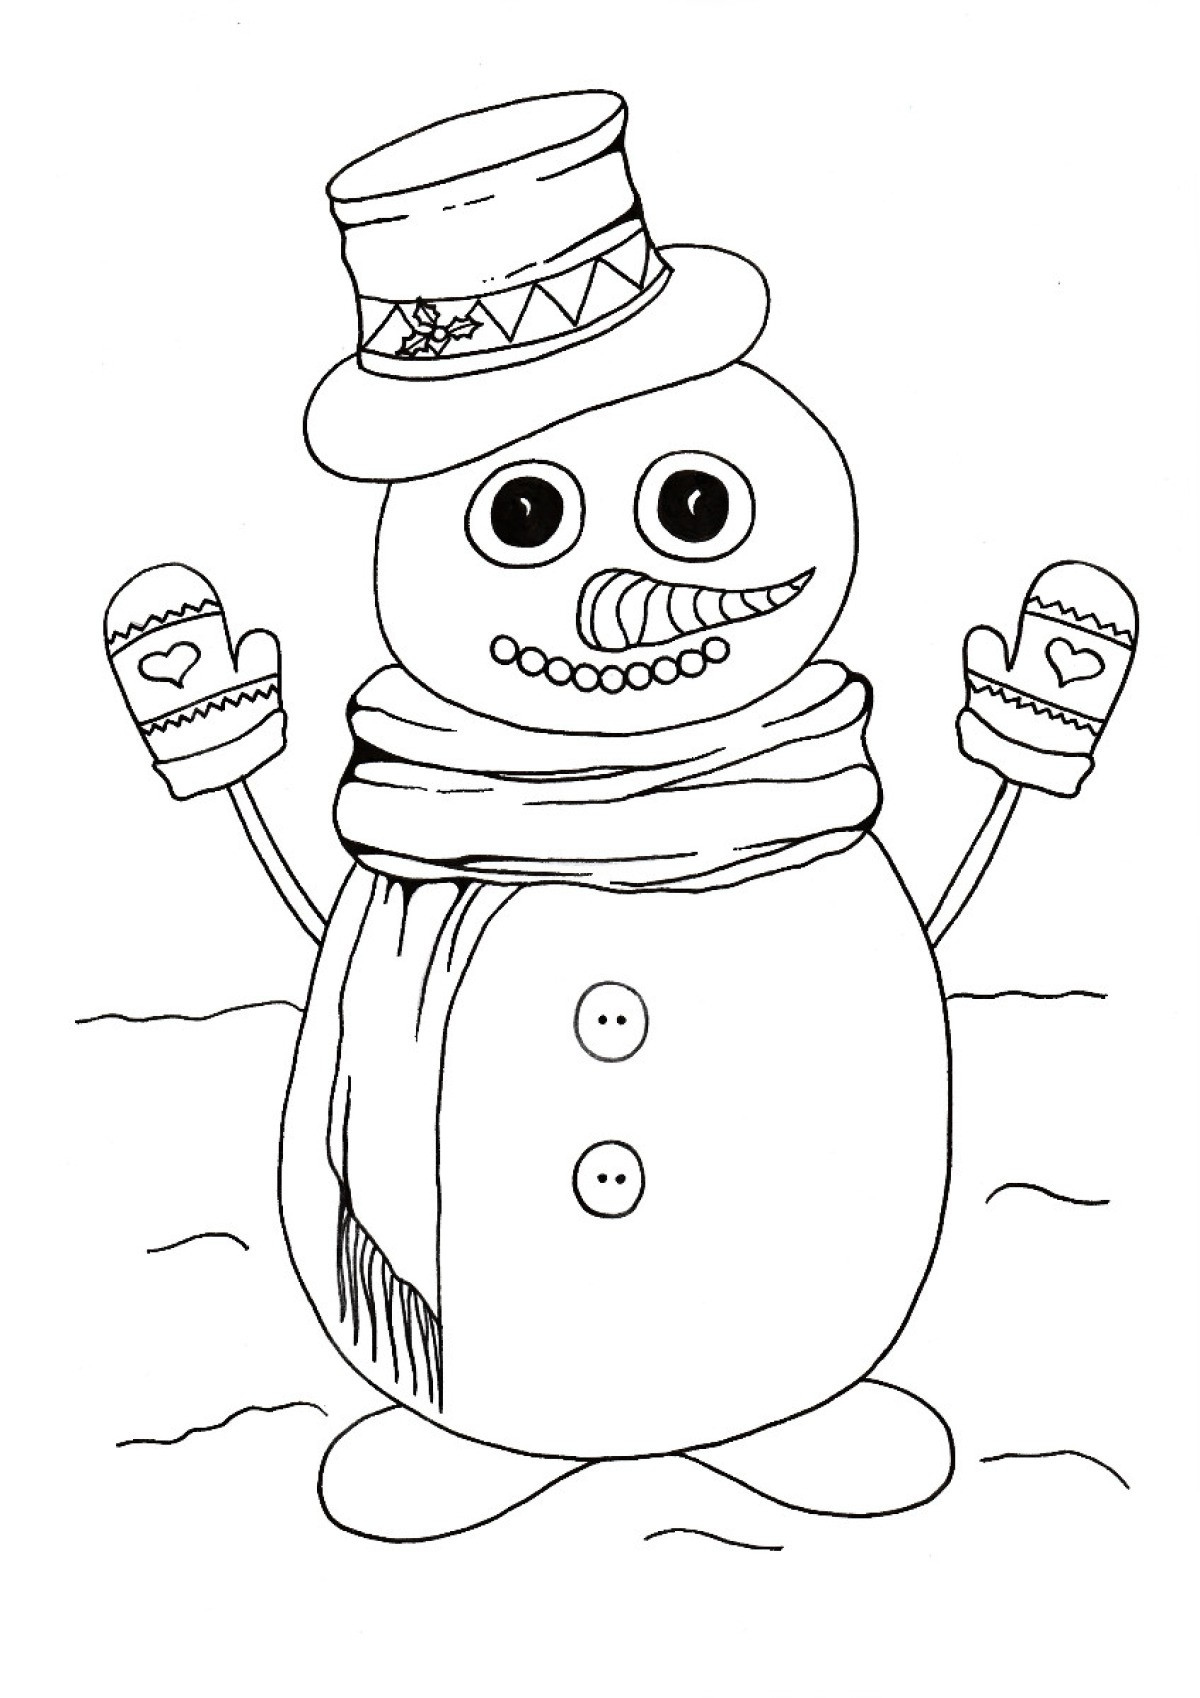 Snowman Picture To Color